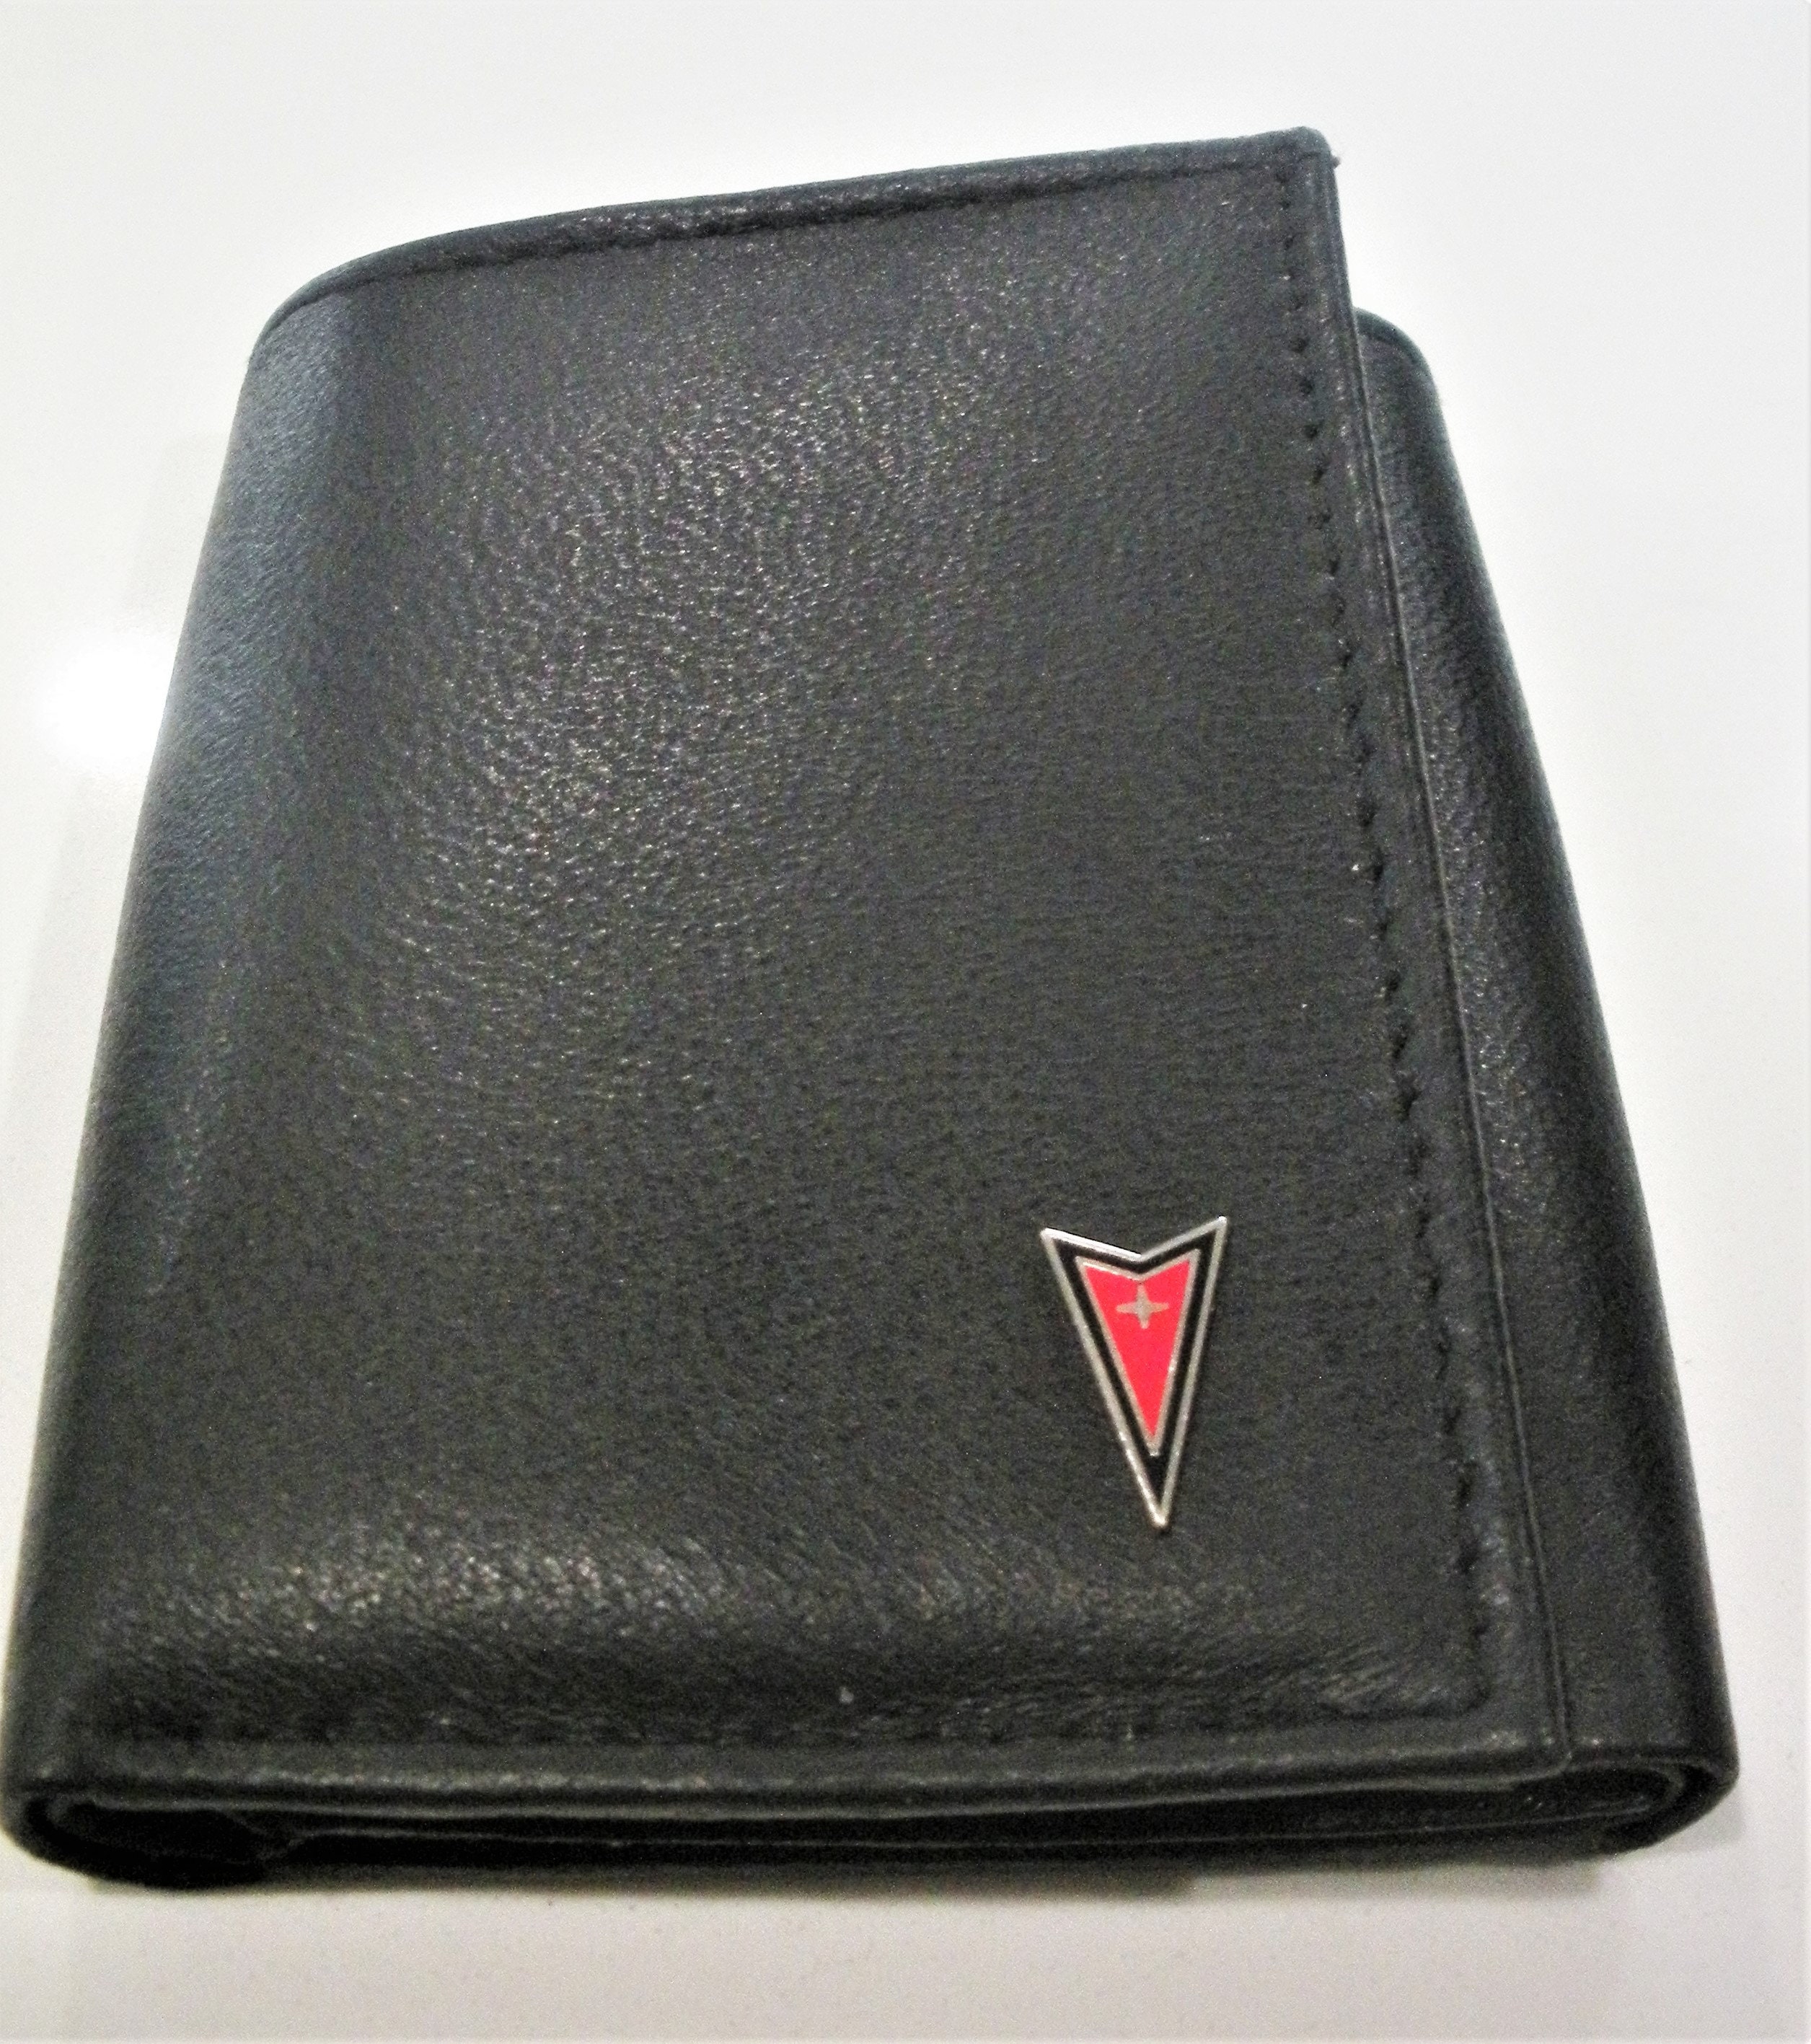 VINTAGE GUESS BLACK MENS LEATHER BIFOLD WALLET GUESS NEVER USED PASSCASE